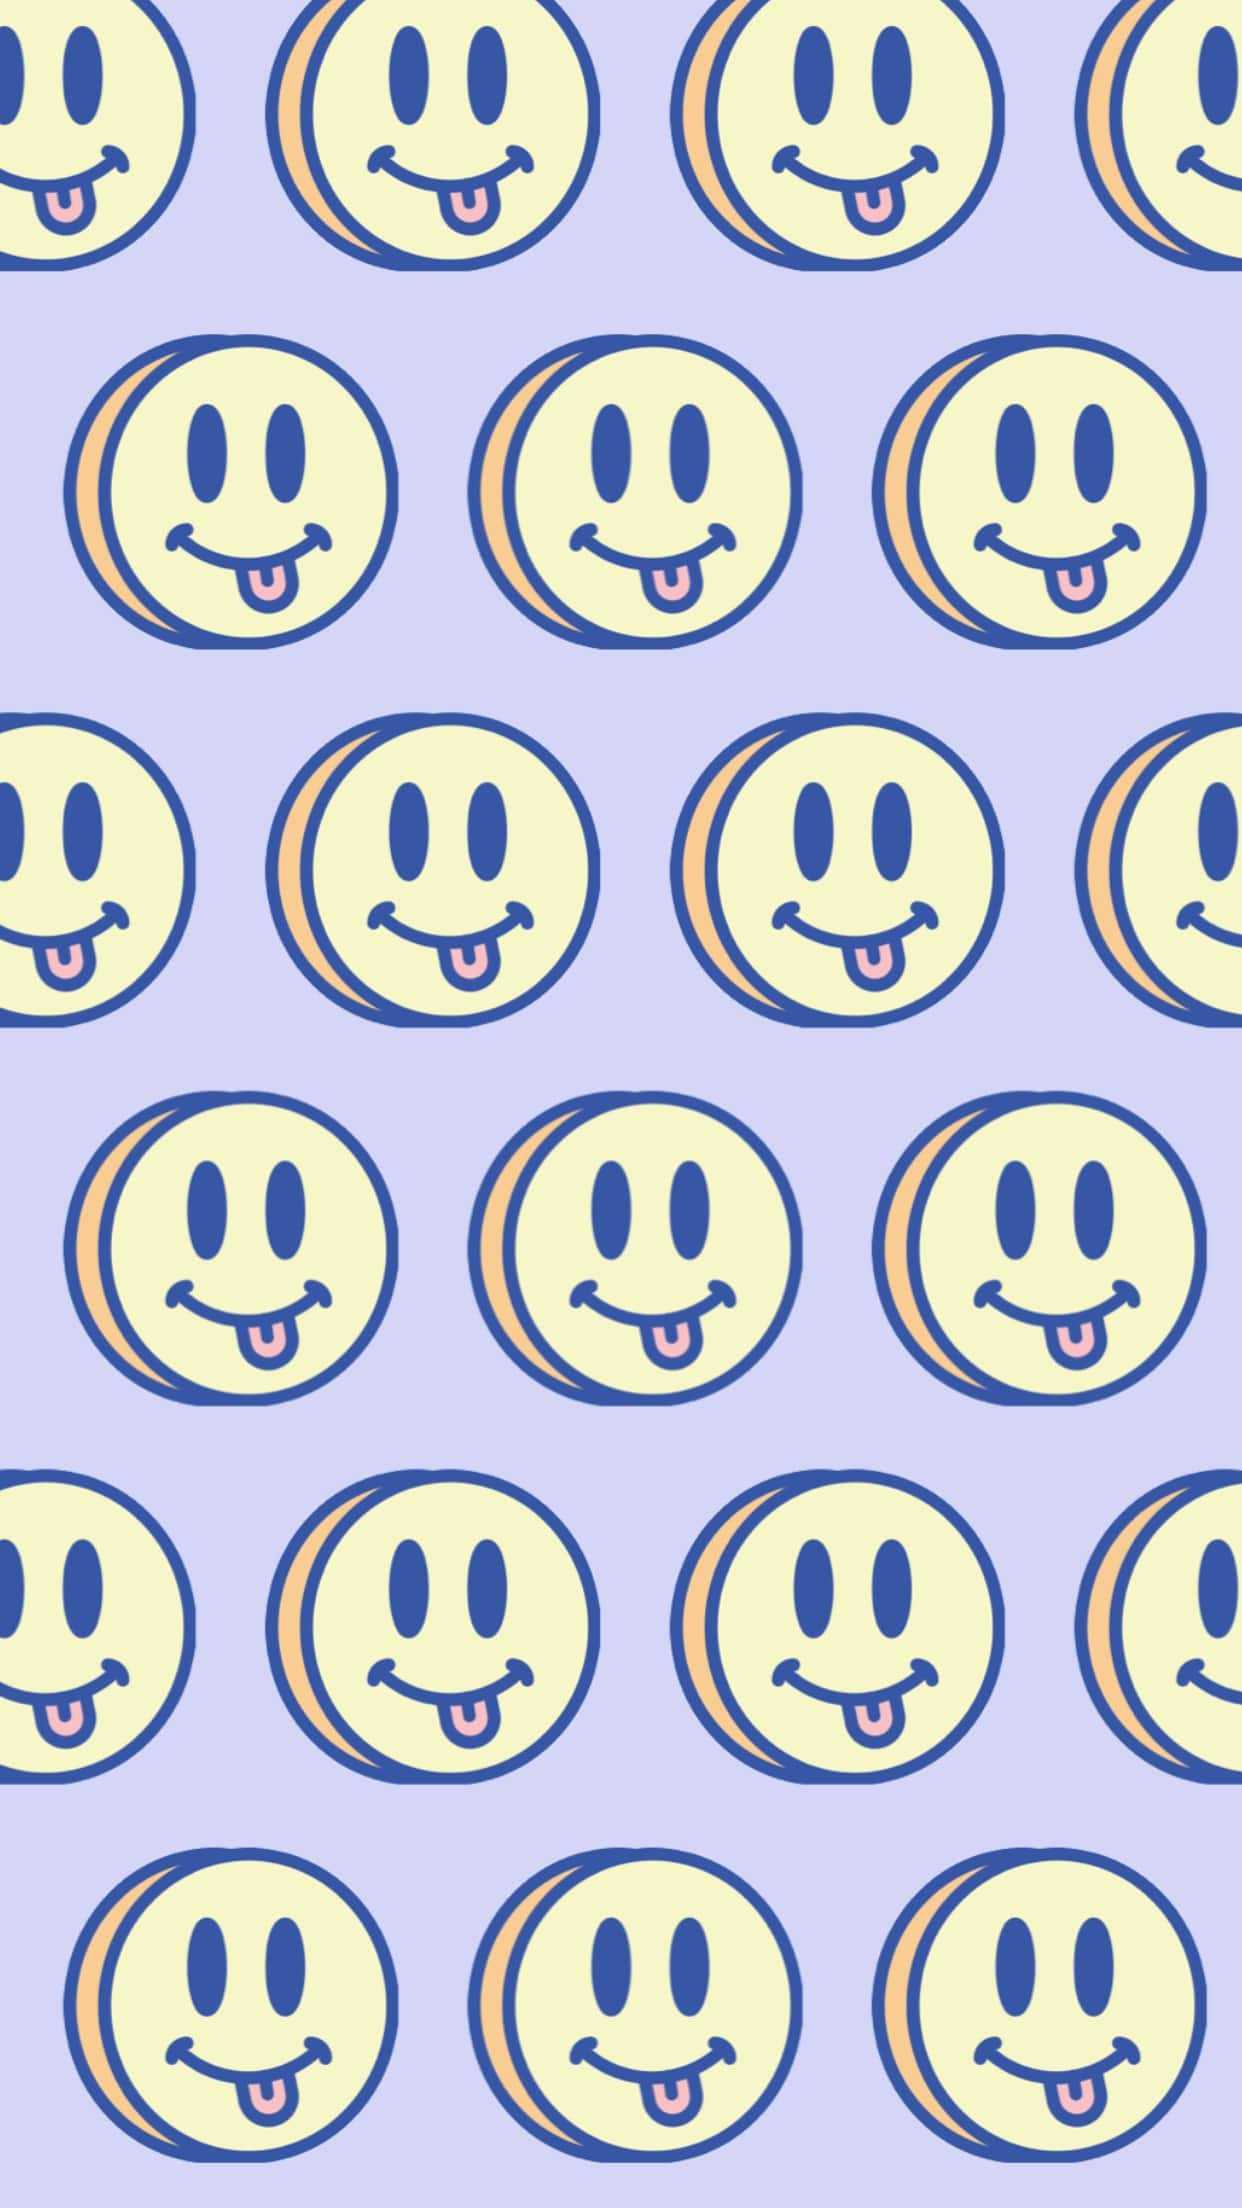 Smiley Face Wallpaper Iphone Ixpap